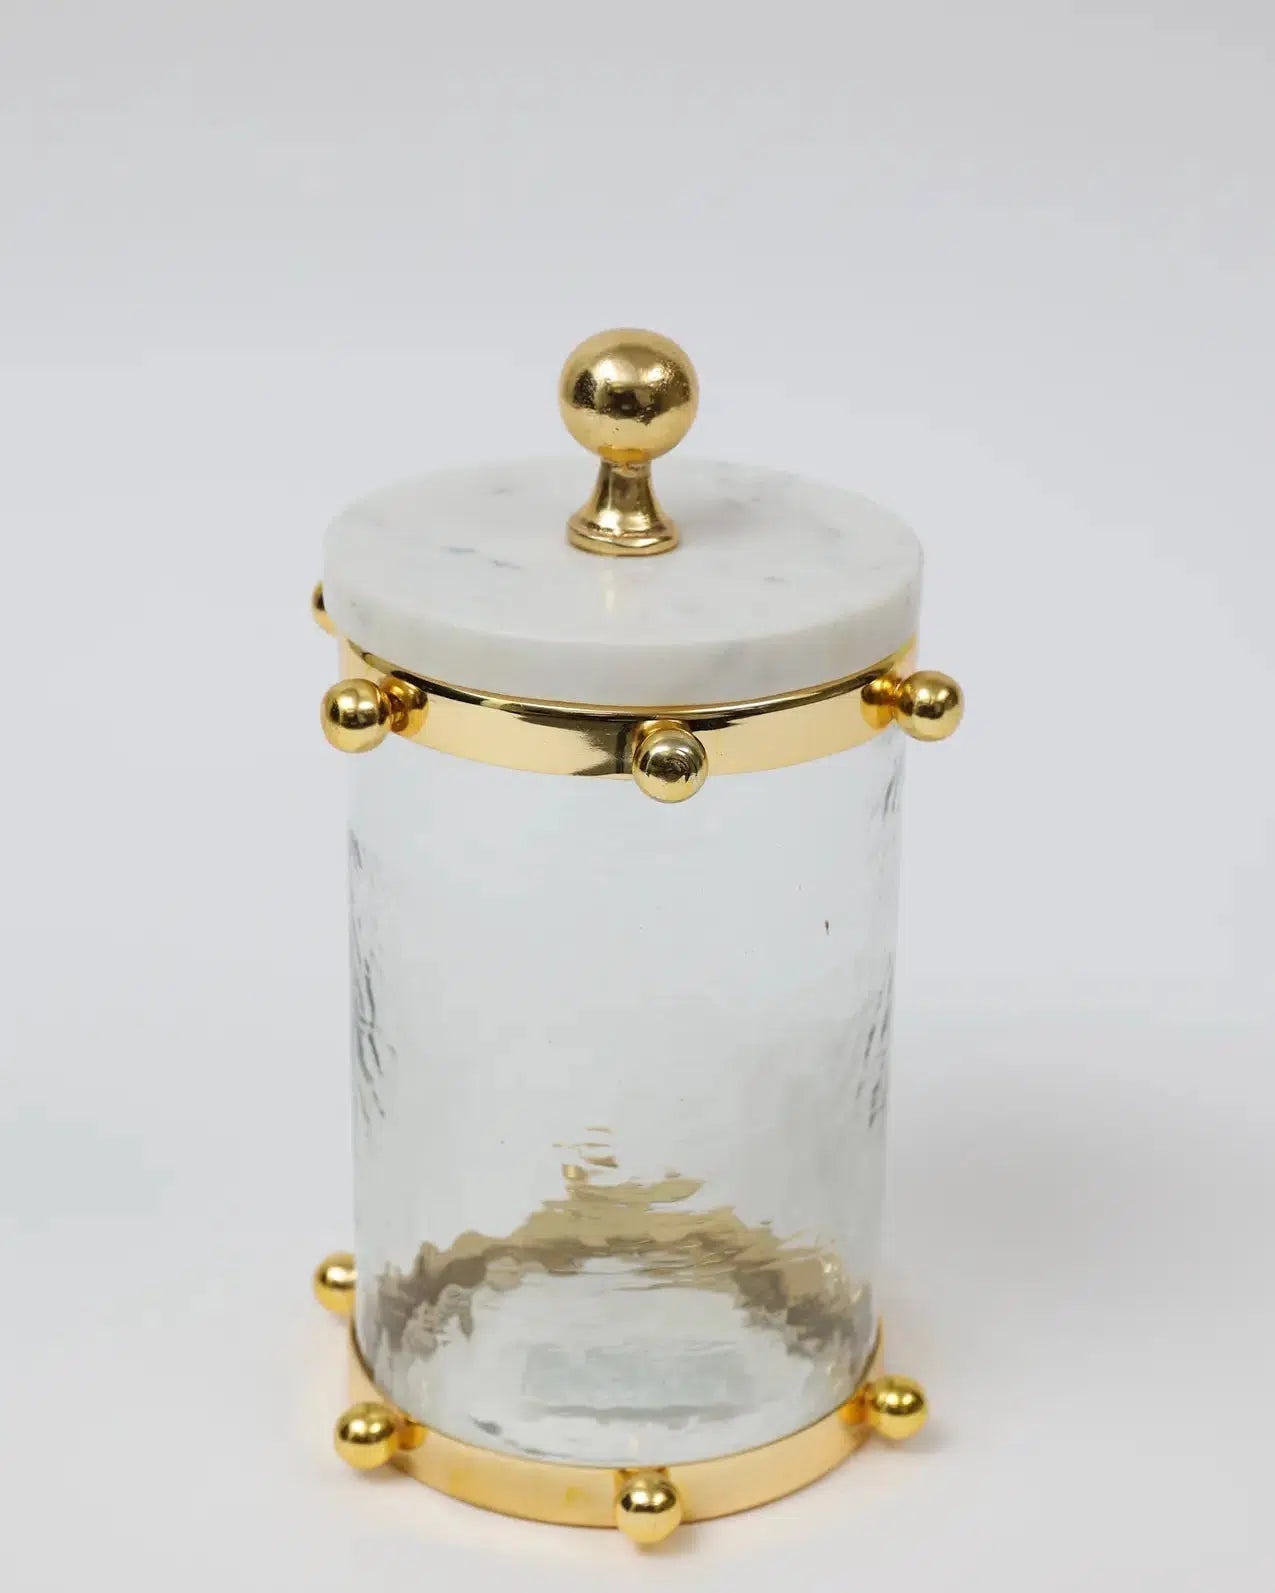 Hammered Glass Canister w/ Gold Ball Design and Marble Cover Canisters High Class Touch - Home Decor Medium 